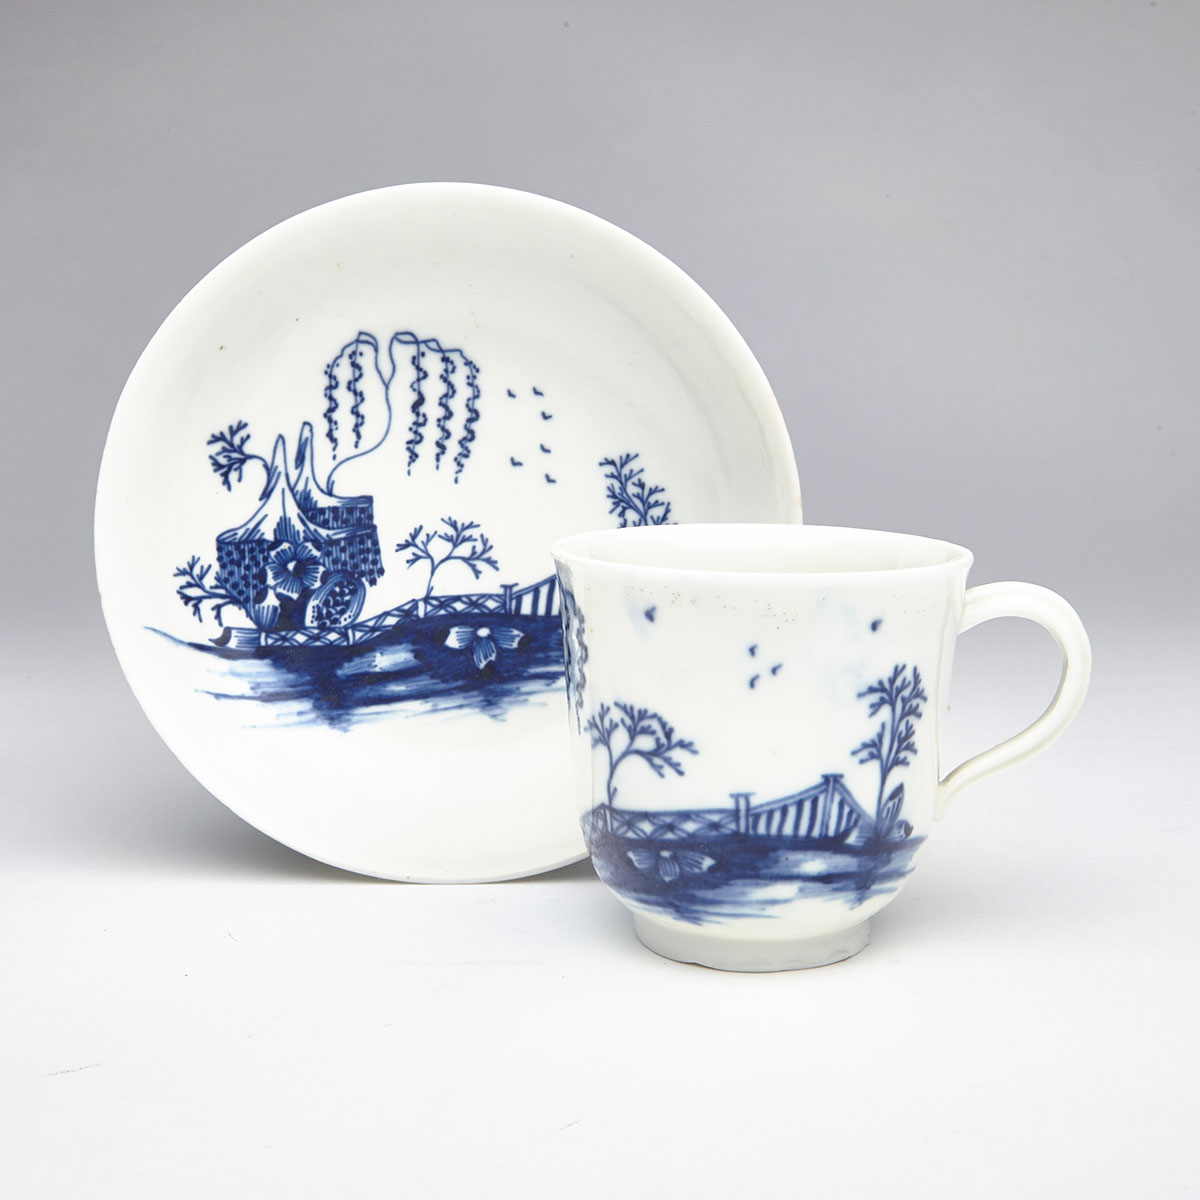 Blue and White Porcelain Cup and Saucer, probably English, c.1760